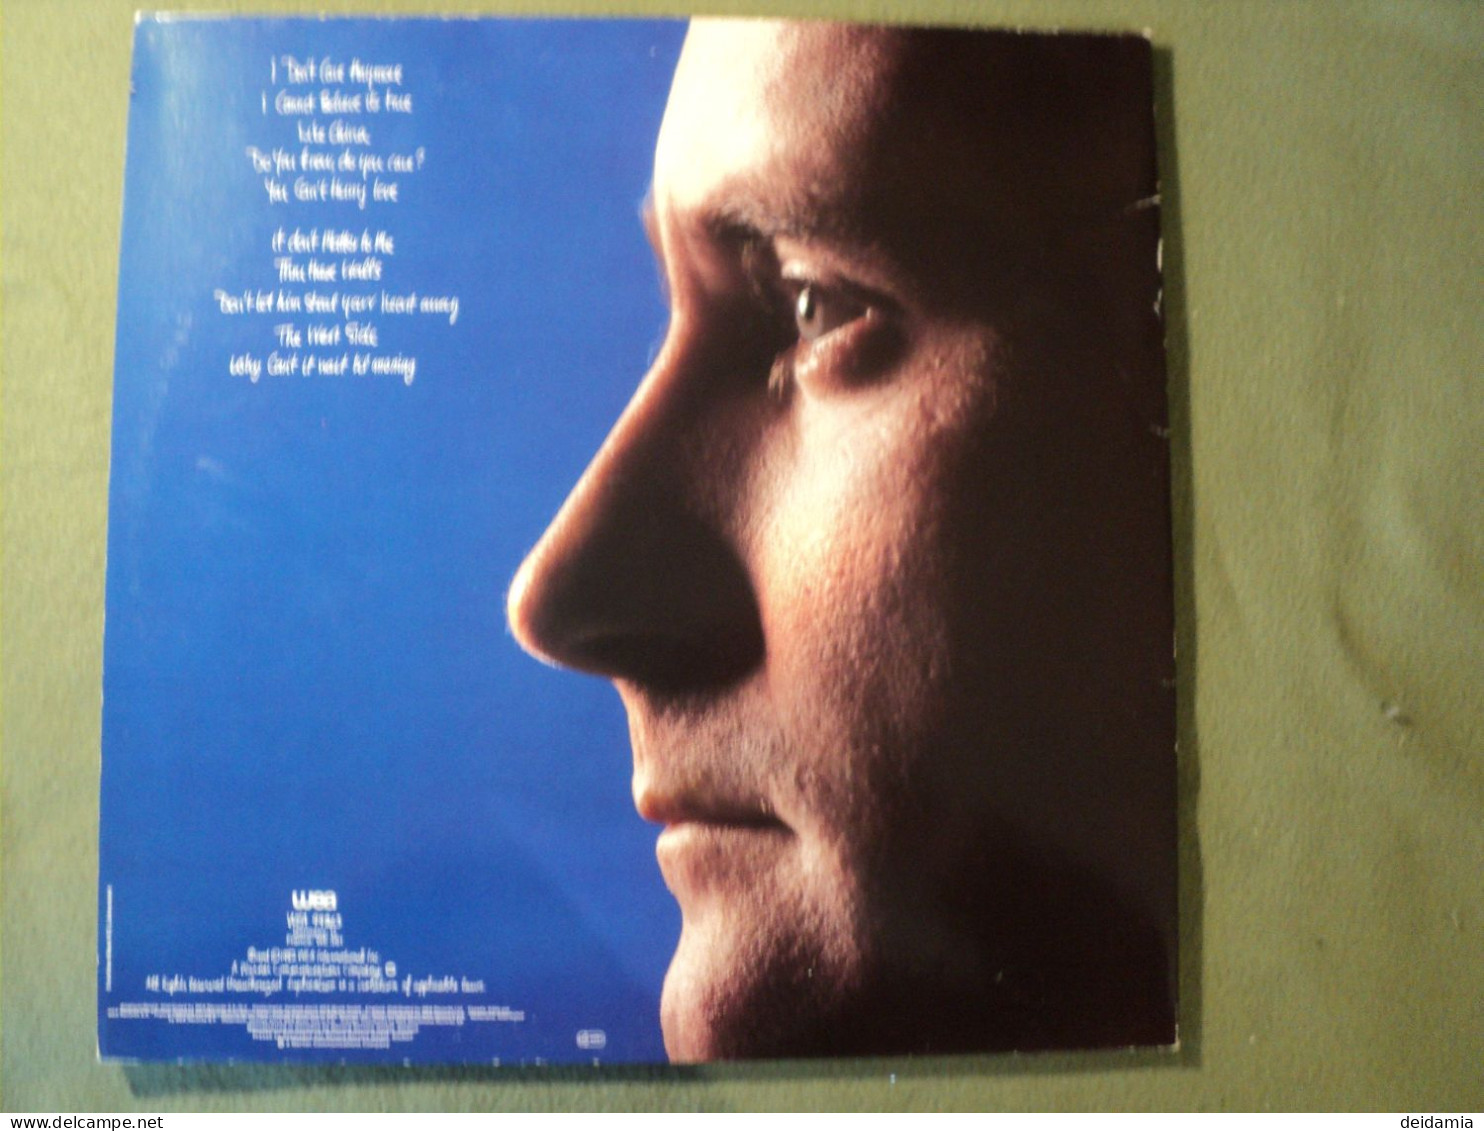 33 TOURS PHIL COLLINS. WEA 99 263. HELLO I MUST BE GOING. 1982 I DON T CARE ANYMORE / I CAN T BELIEVE IT S TRUE / LIKE C - Disco & Pop